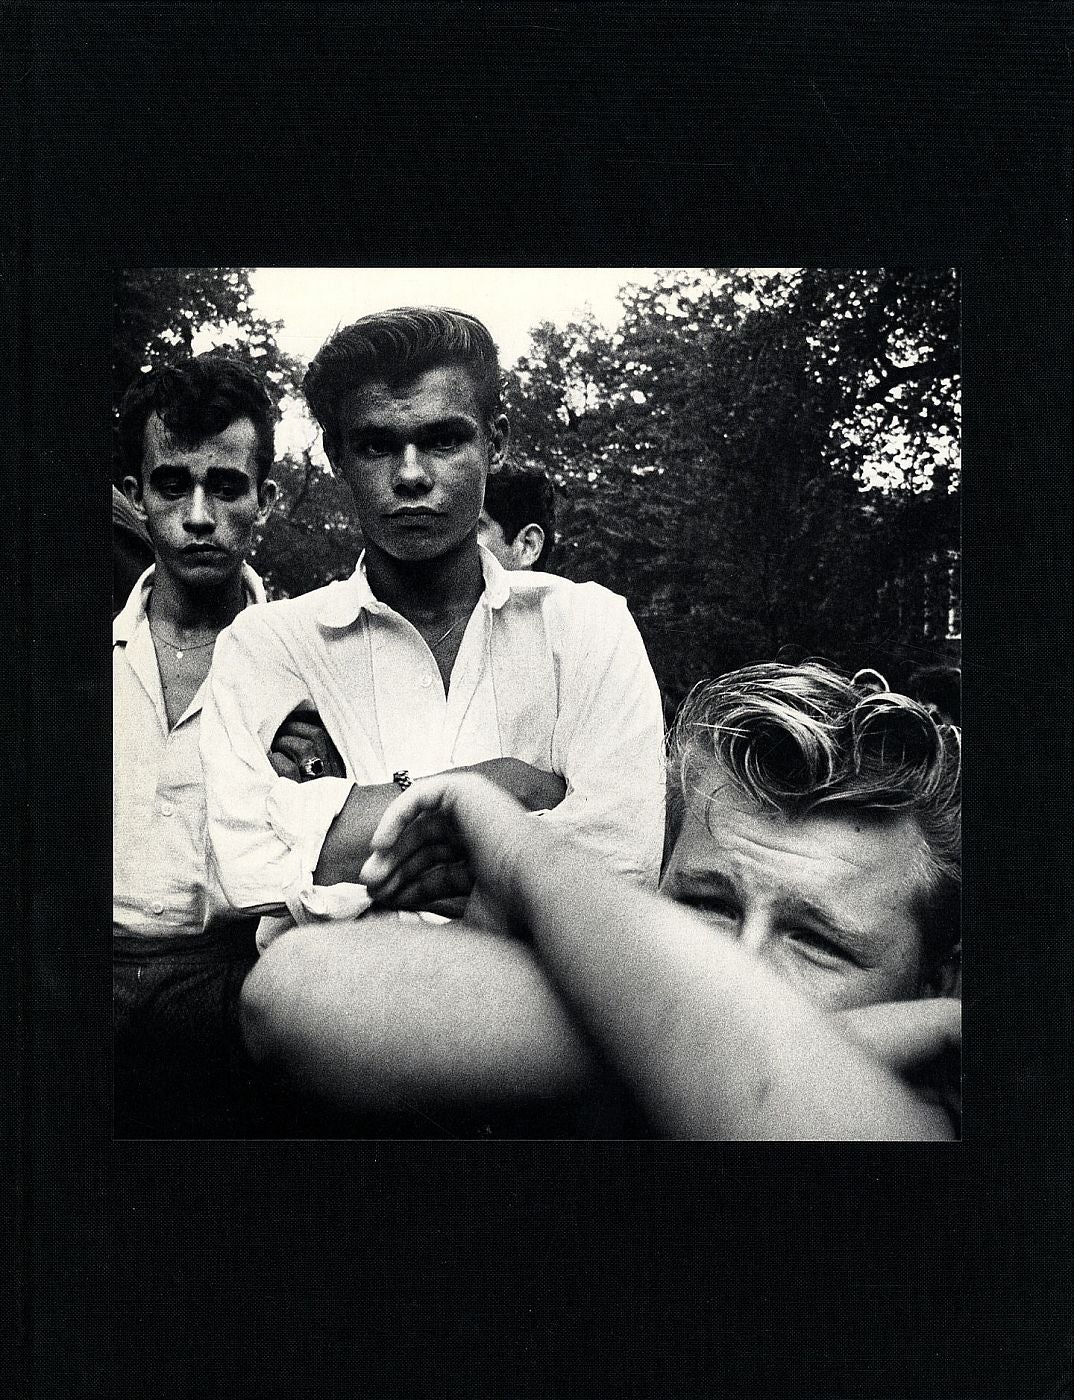 The Age of Adolescence: Joseph Sterling Photographs 1959-1964 ...